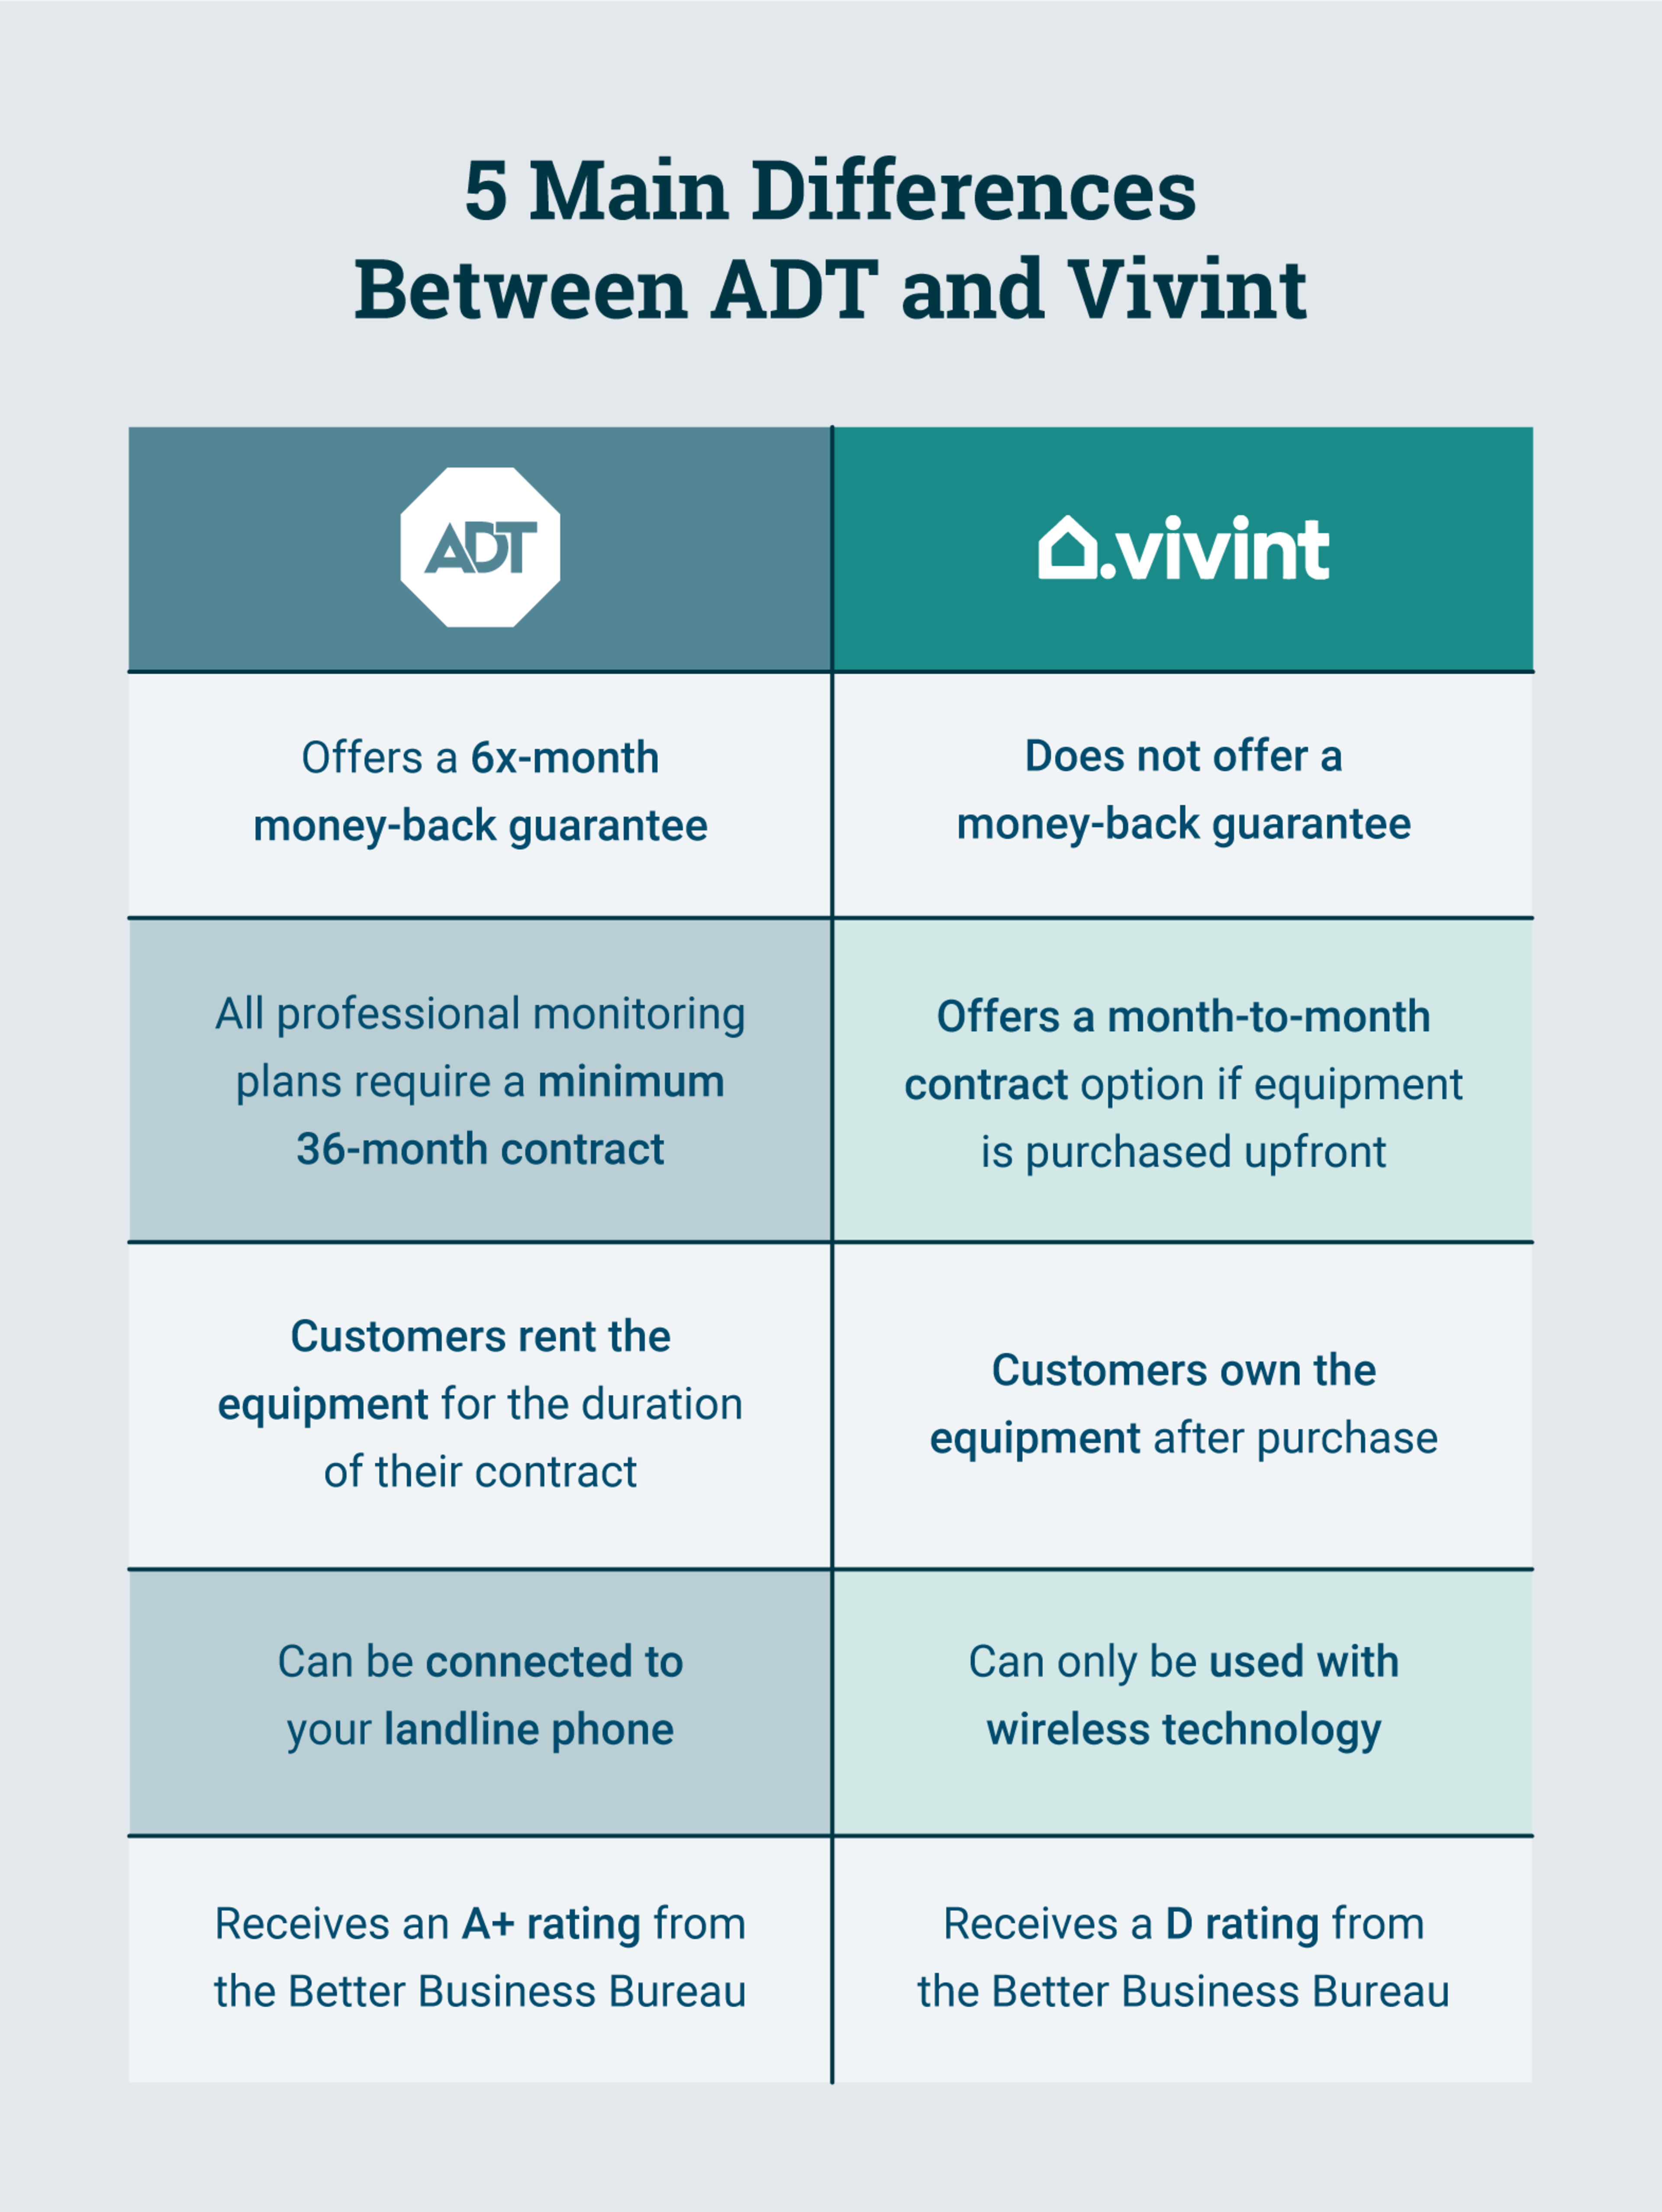 5-main-differences-between-adt-and-vivint